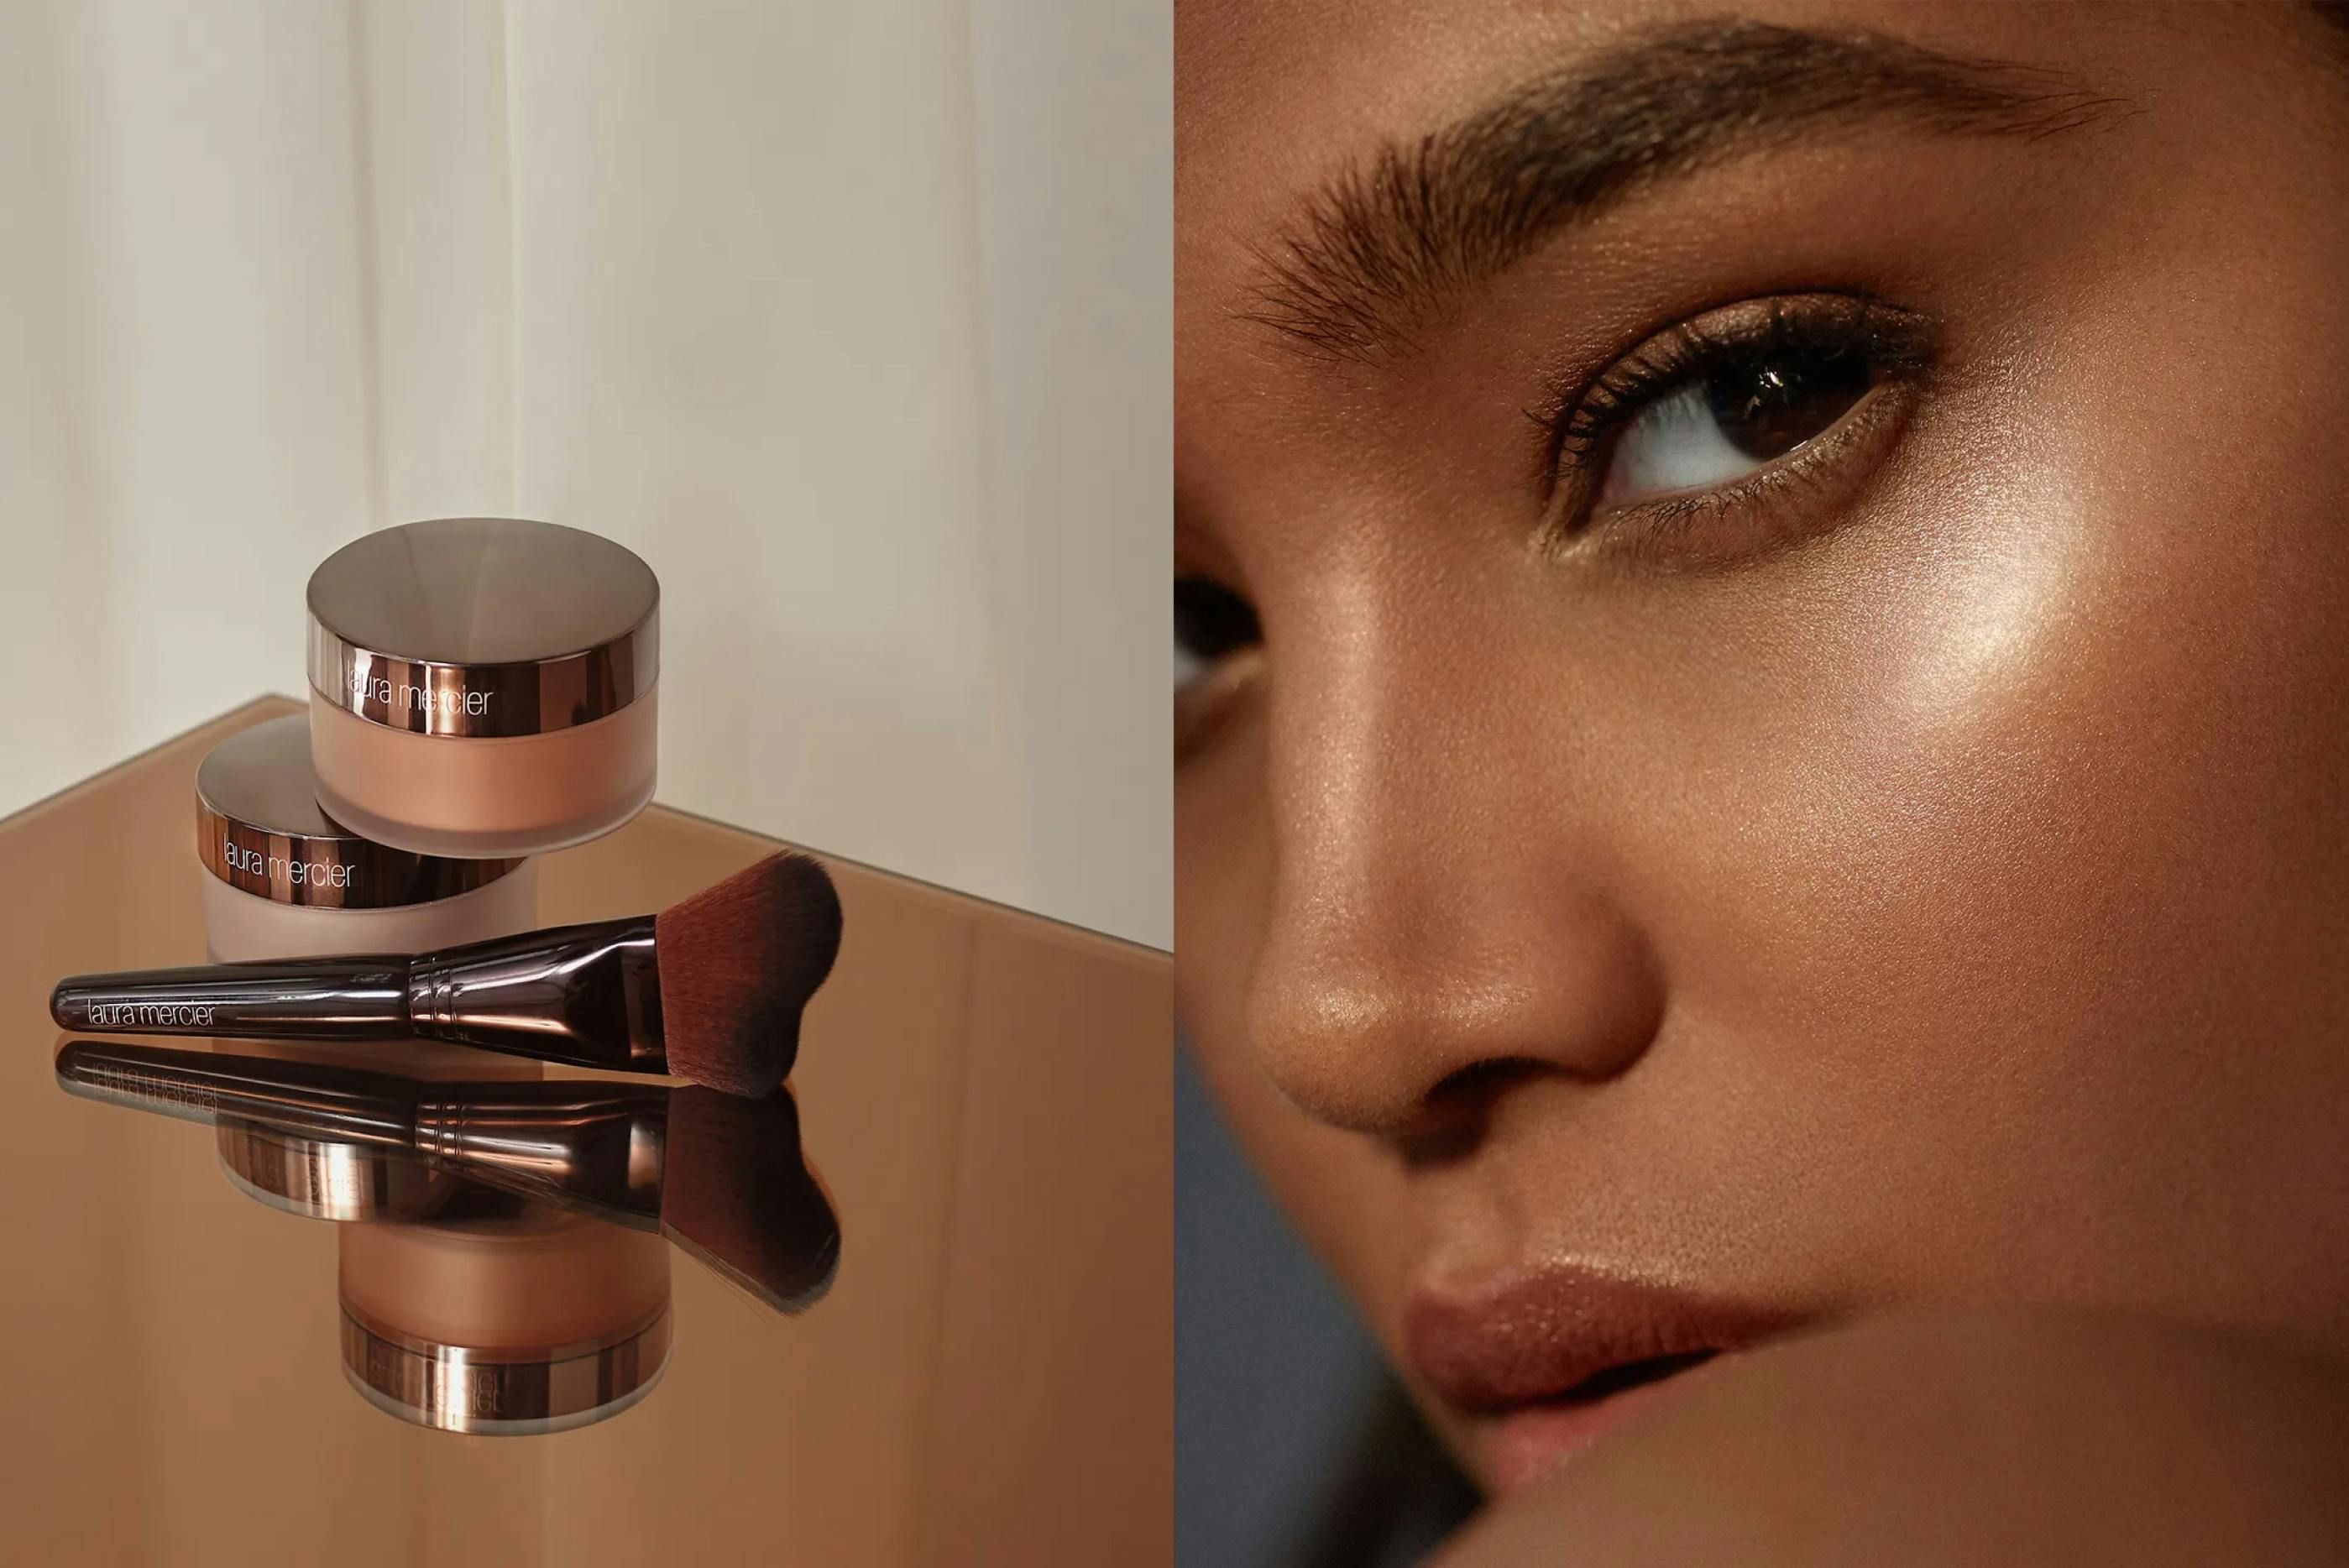 Diptych of a shot of various Laura Mercier product and a model wearing the product